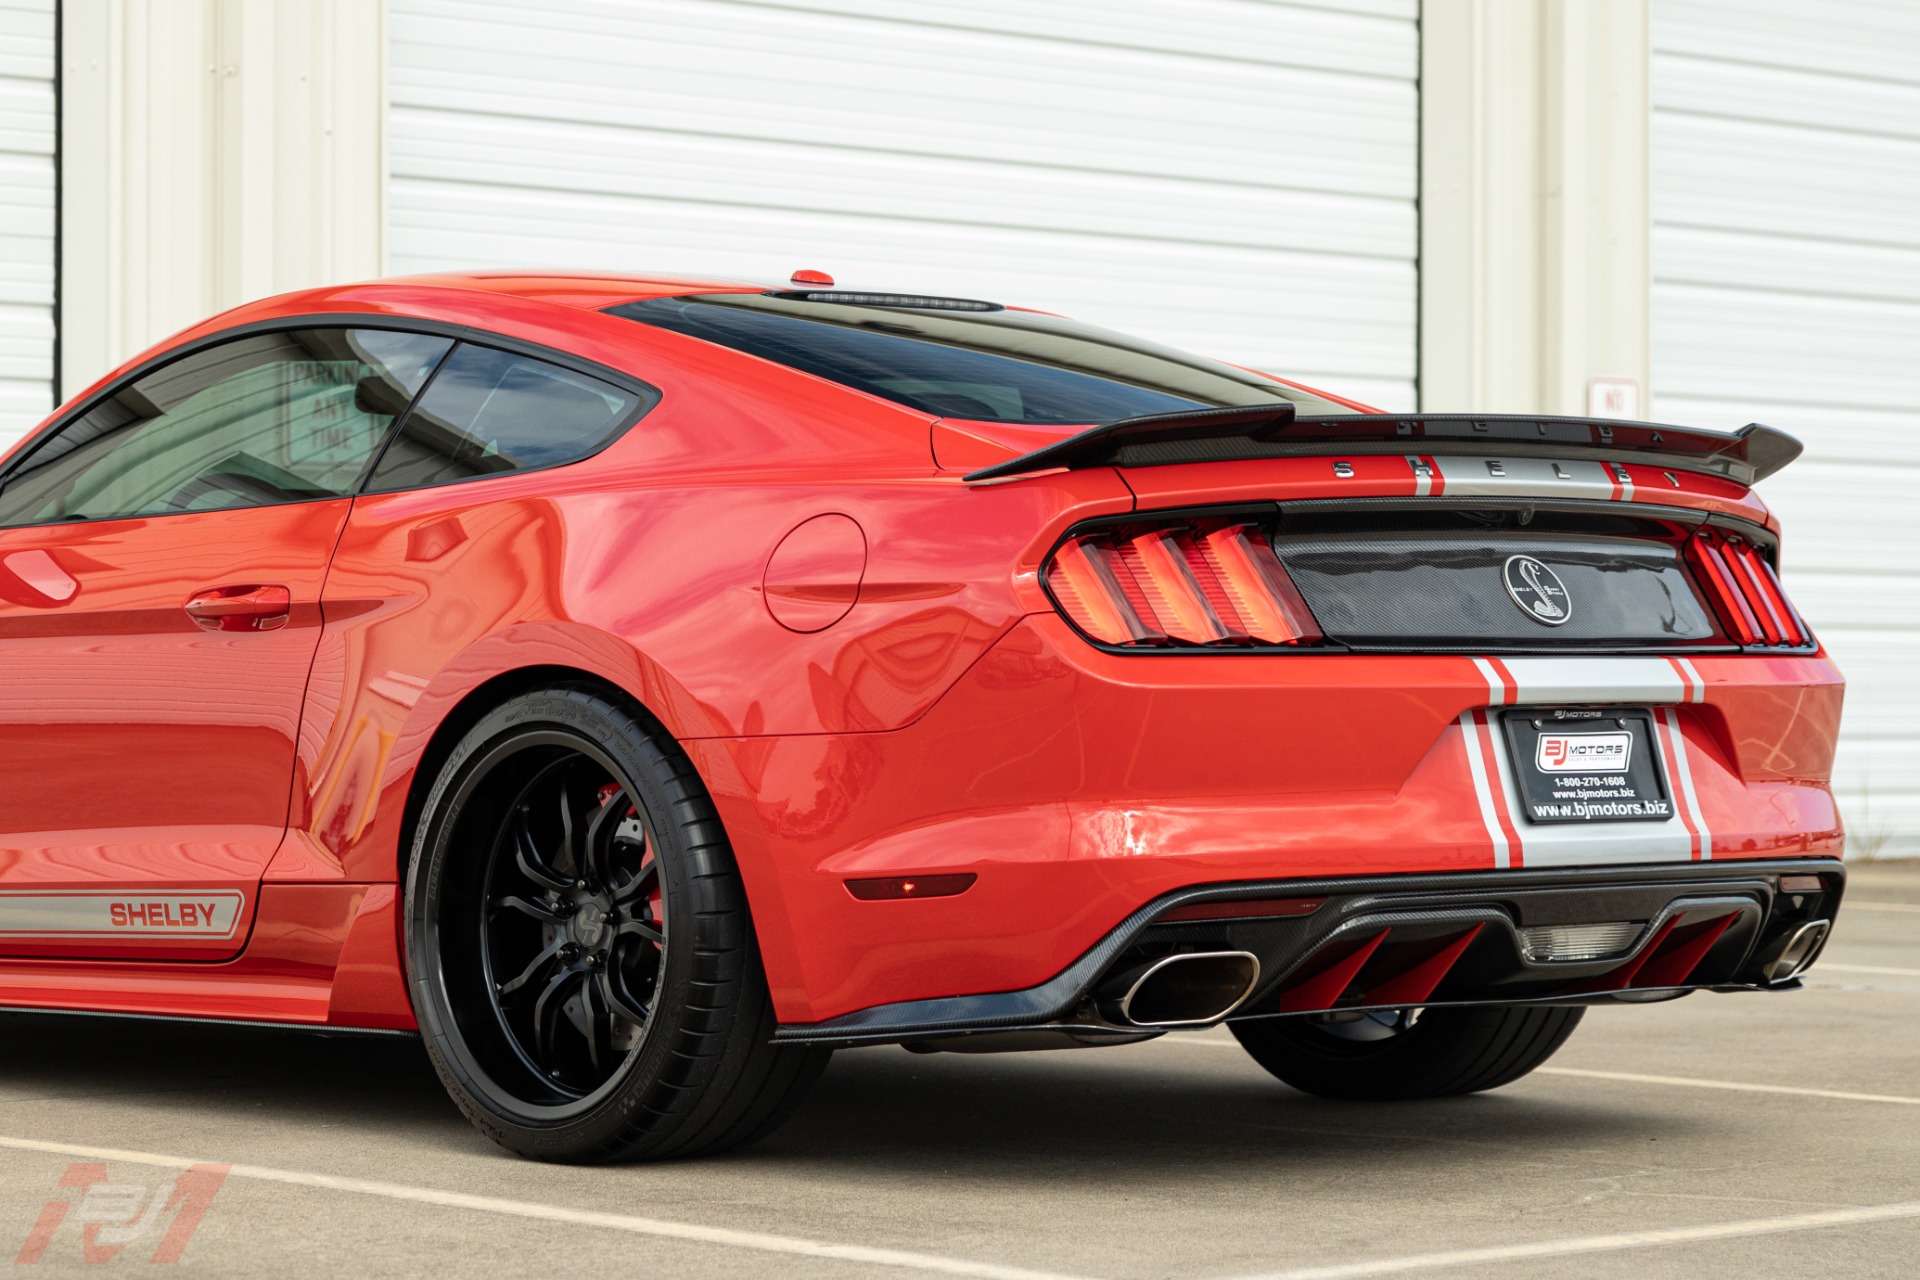 Used-2015-Ford-Mustang-Shelby-Super-Snake